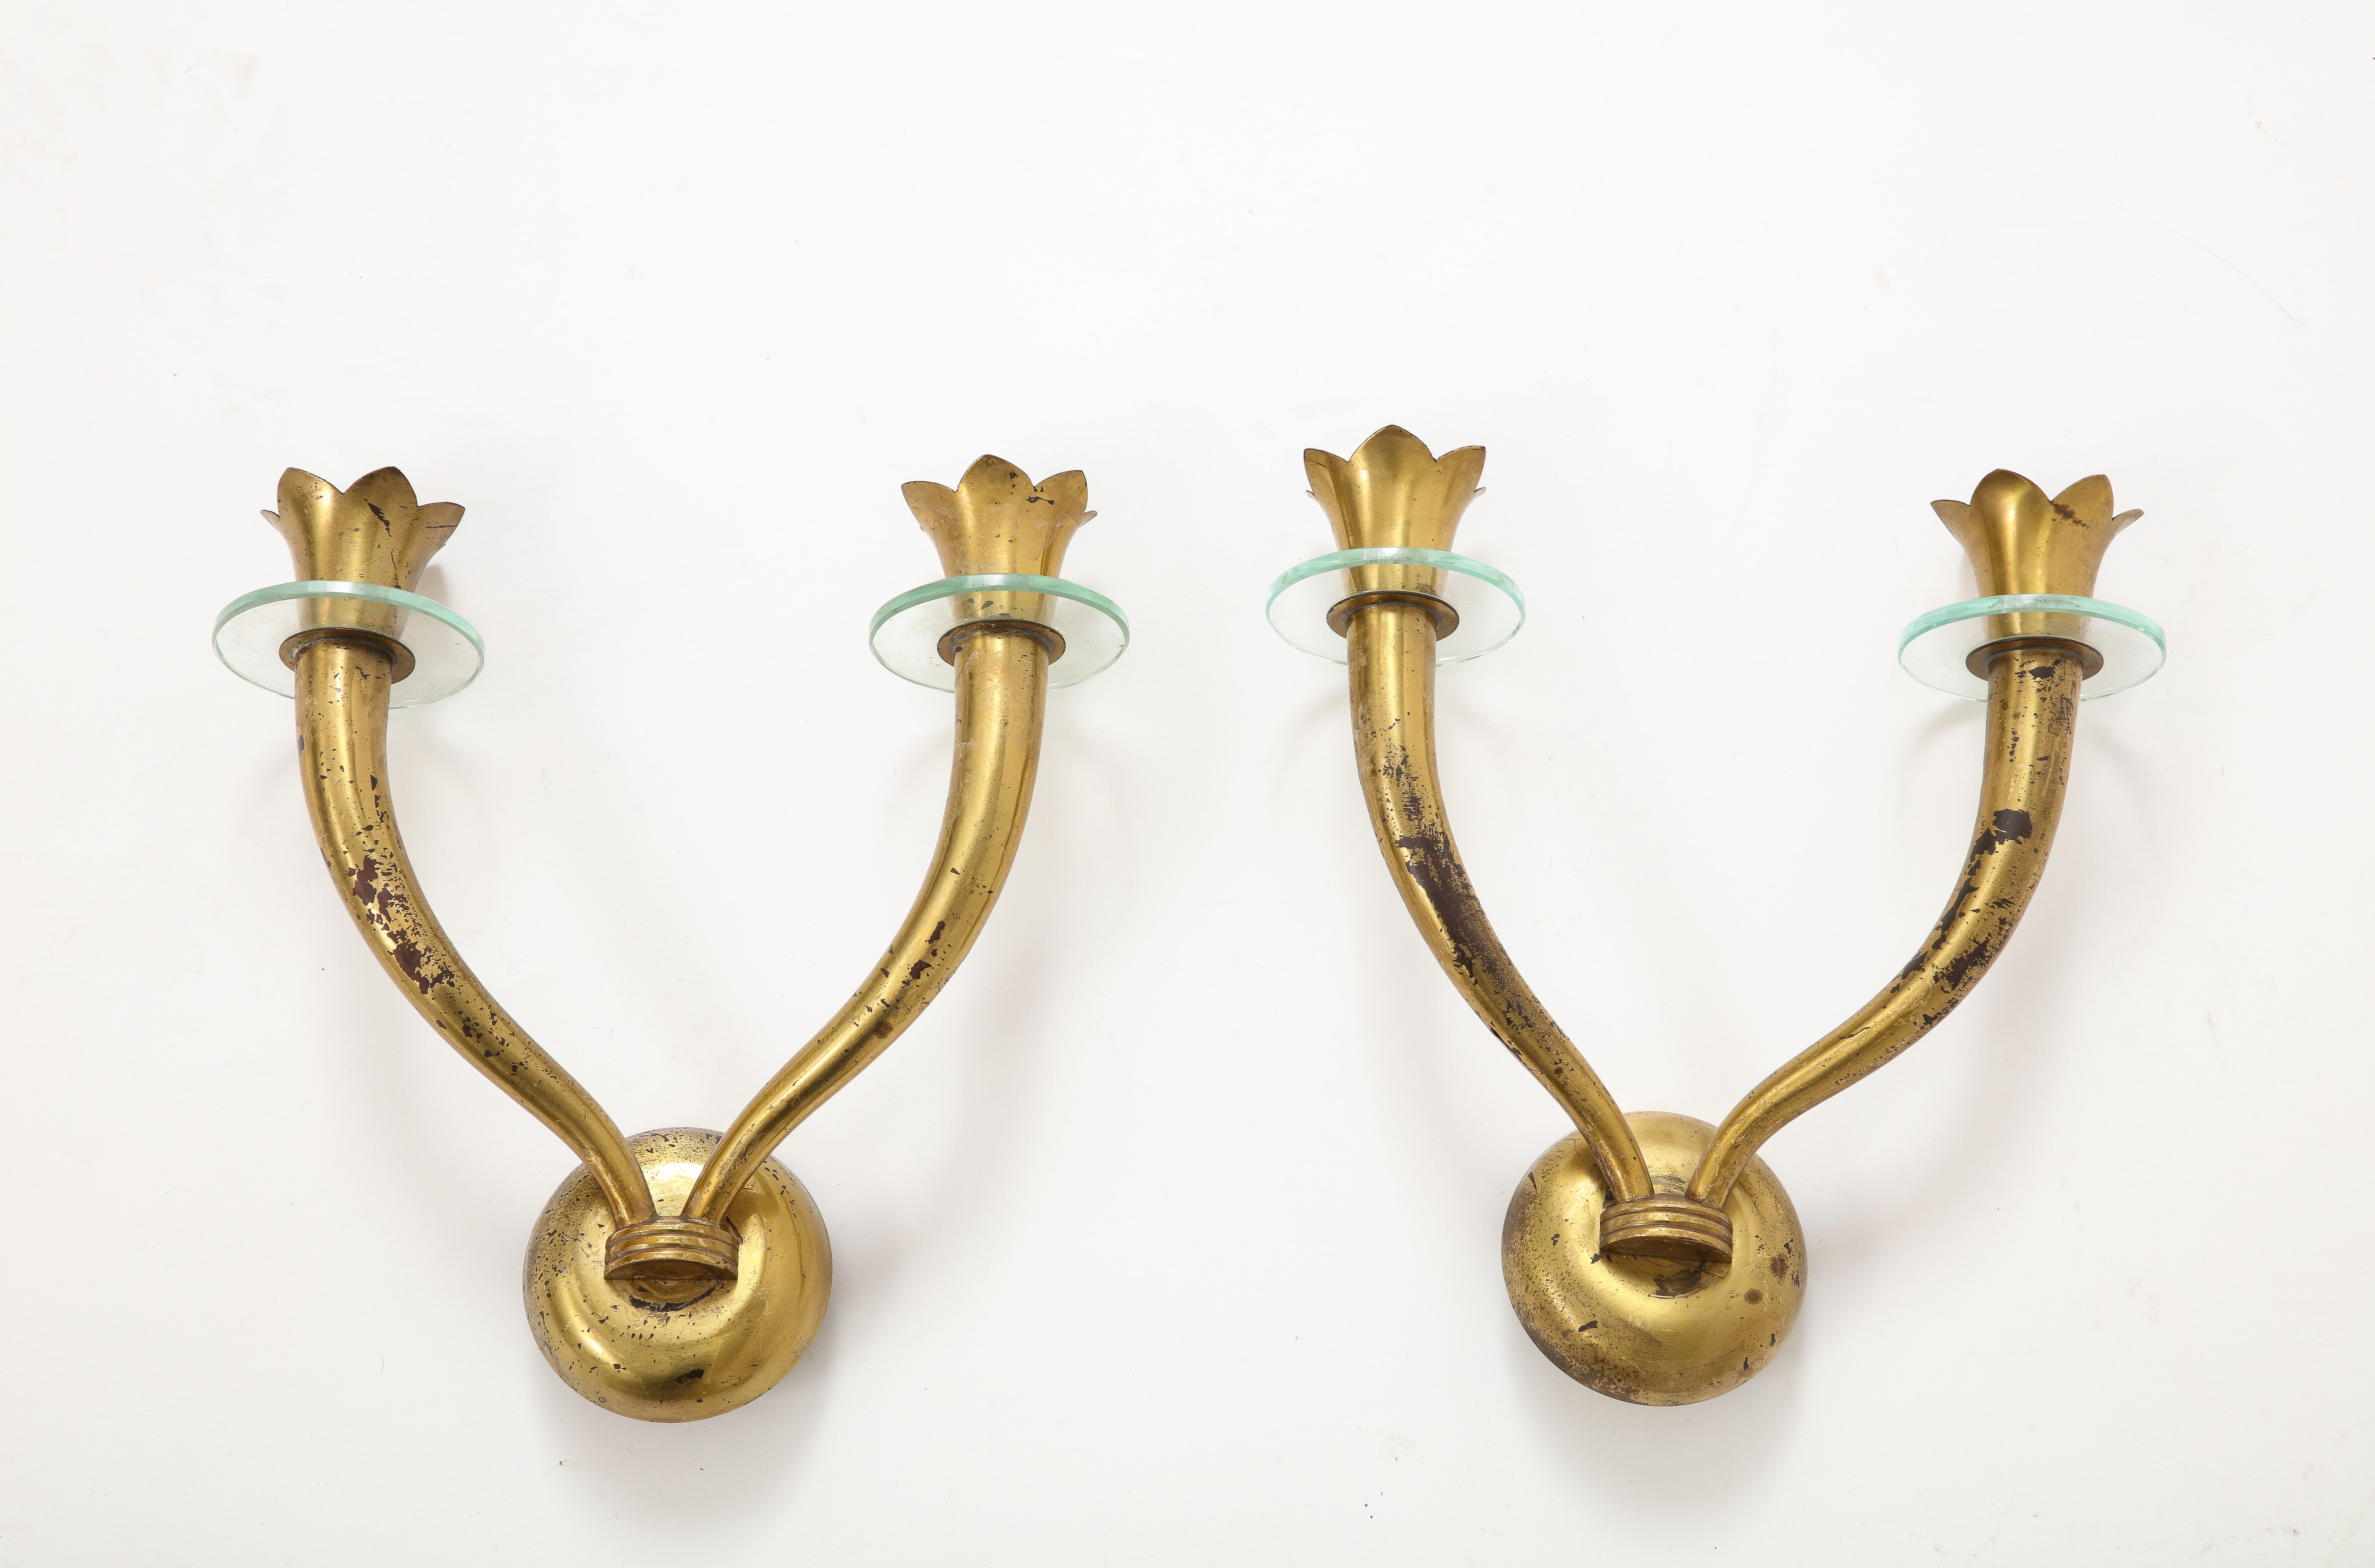 Pair of Brass and Glass Modernist Sconces Att. Emilio Lancia - Italy 1950s For Sale 7